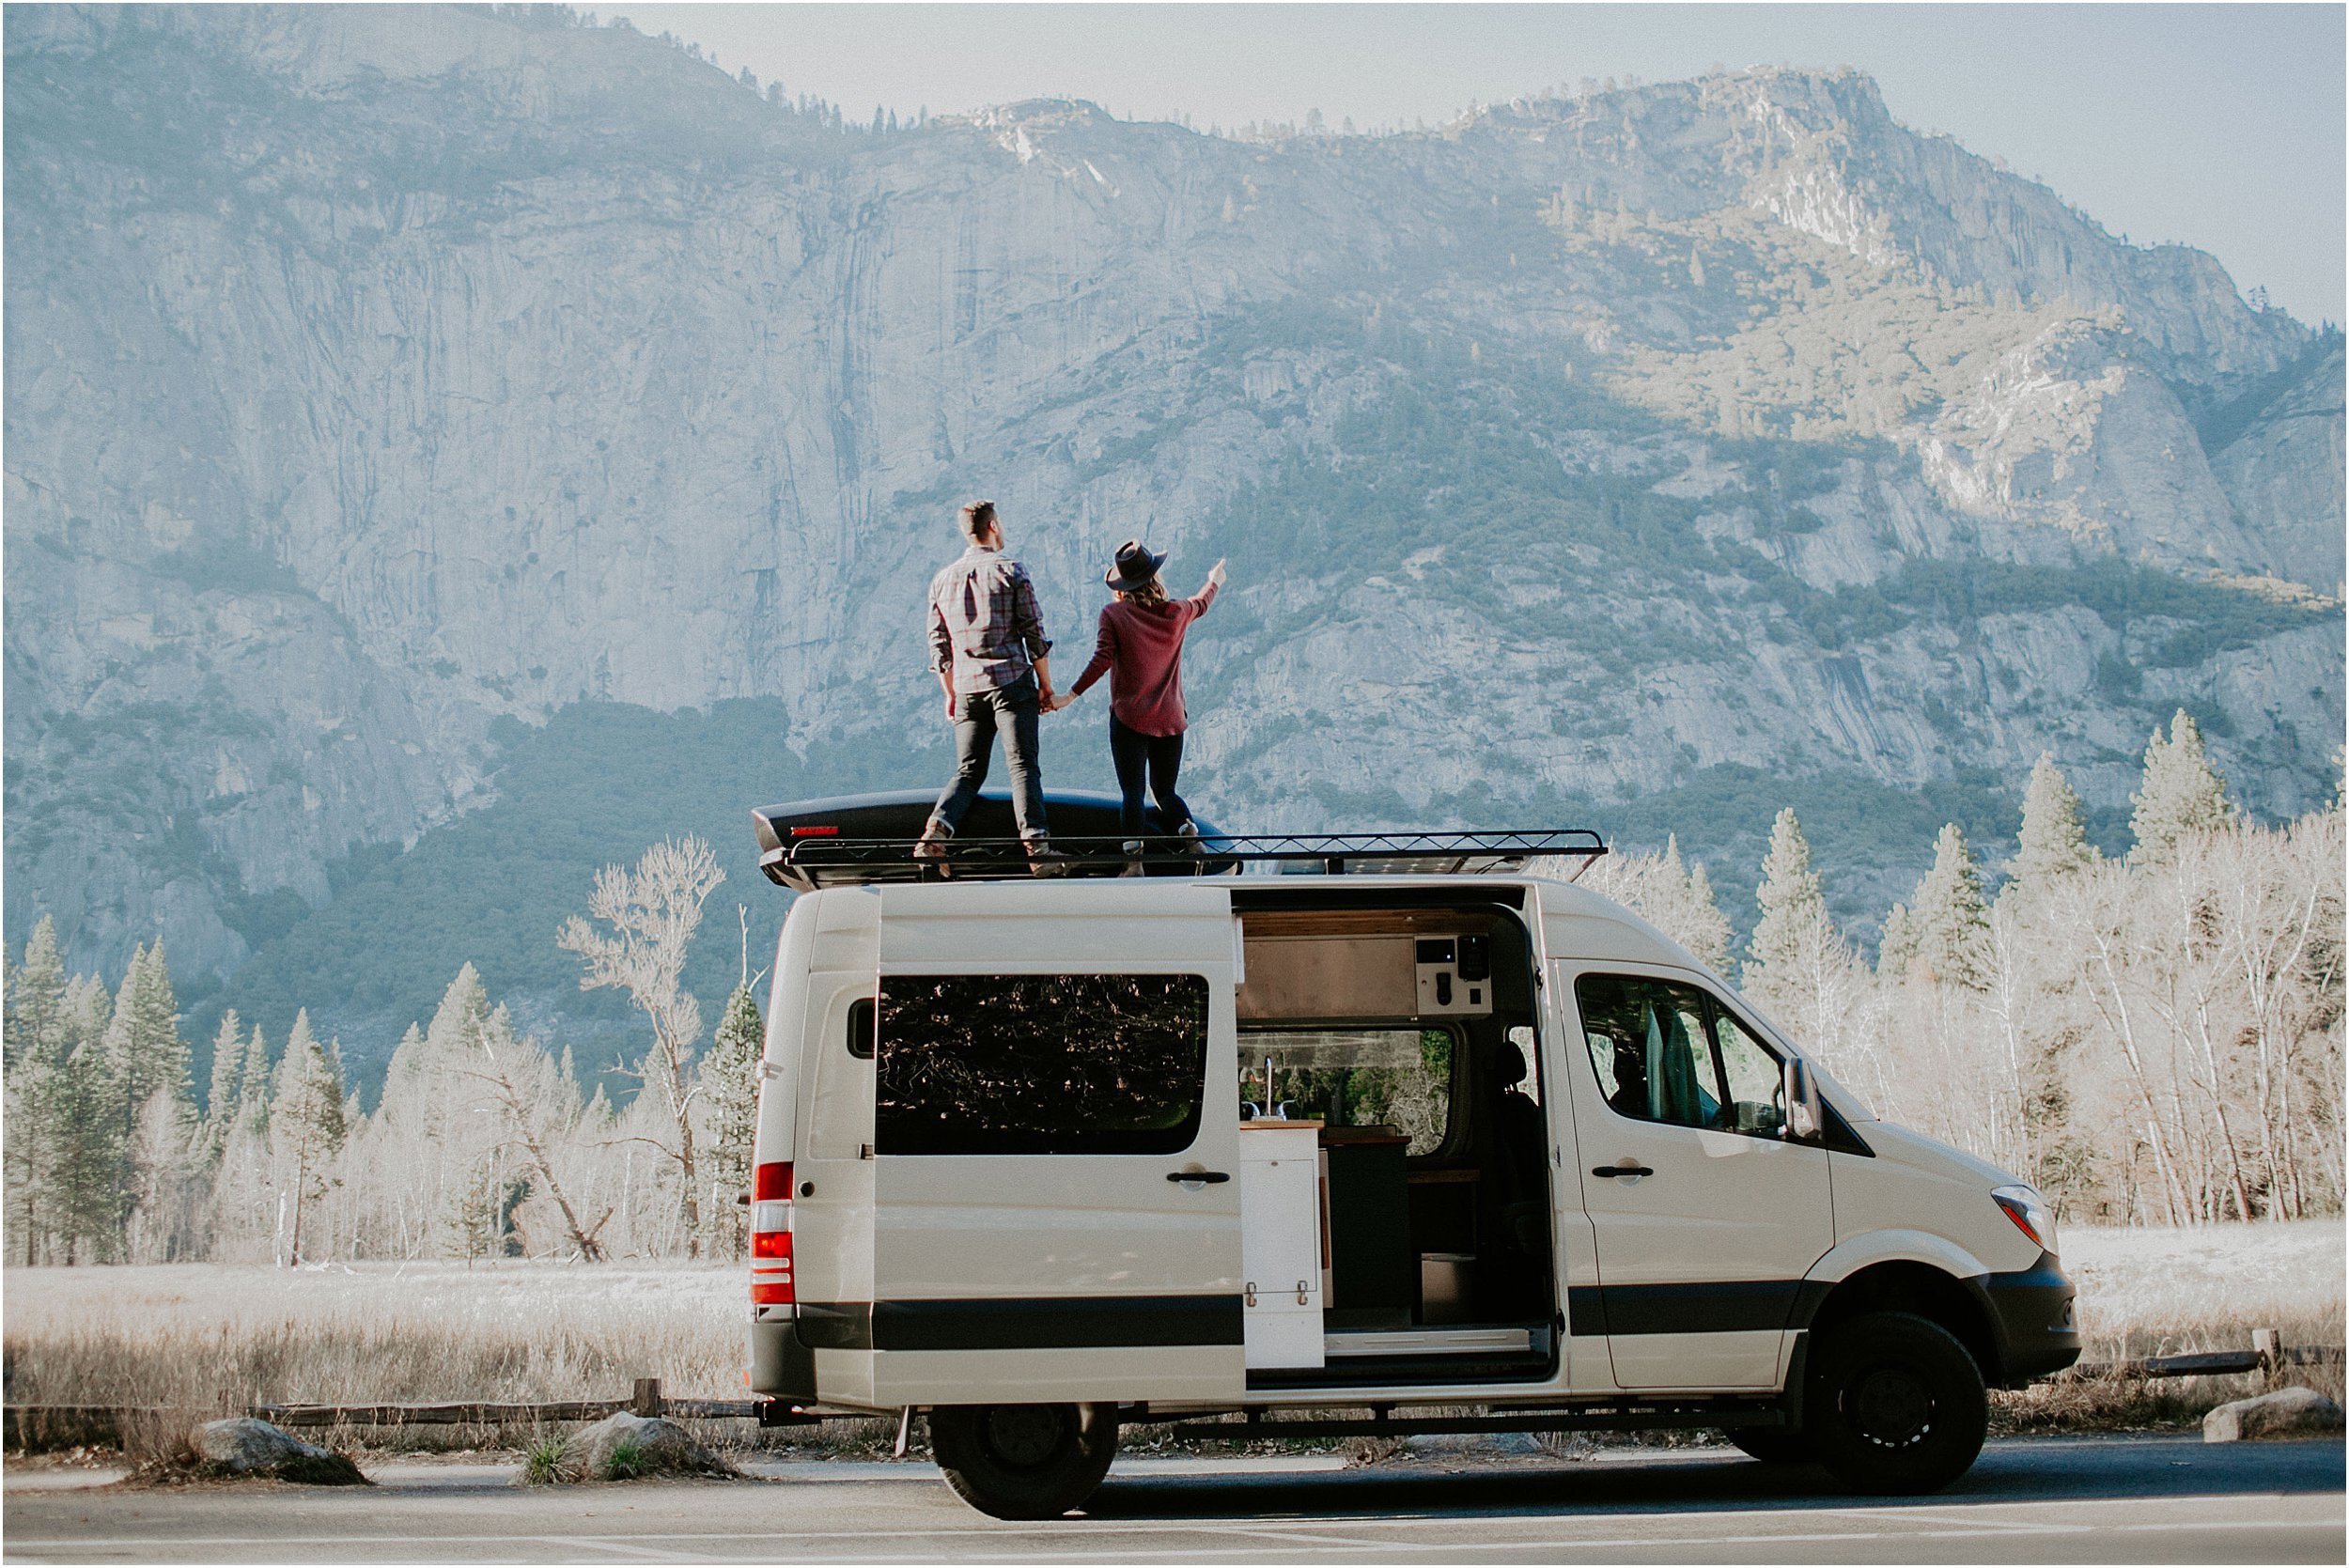  A couple stands holding hands, on top of a sprinter van they live in. They are in Yosemite valley surrounded by large sheer walls of rock. 